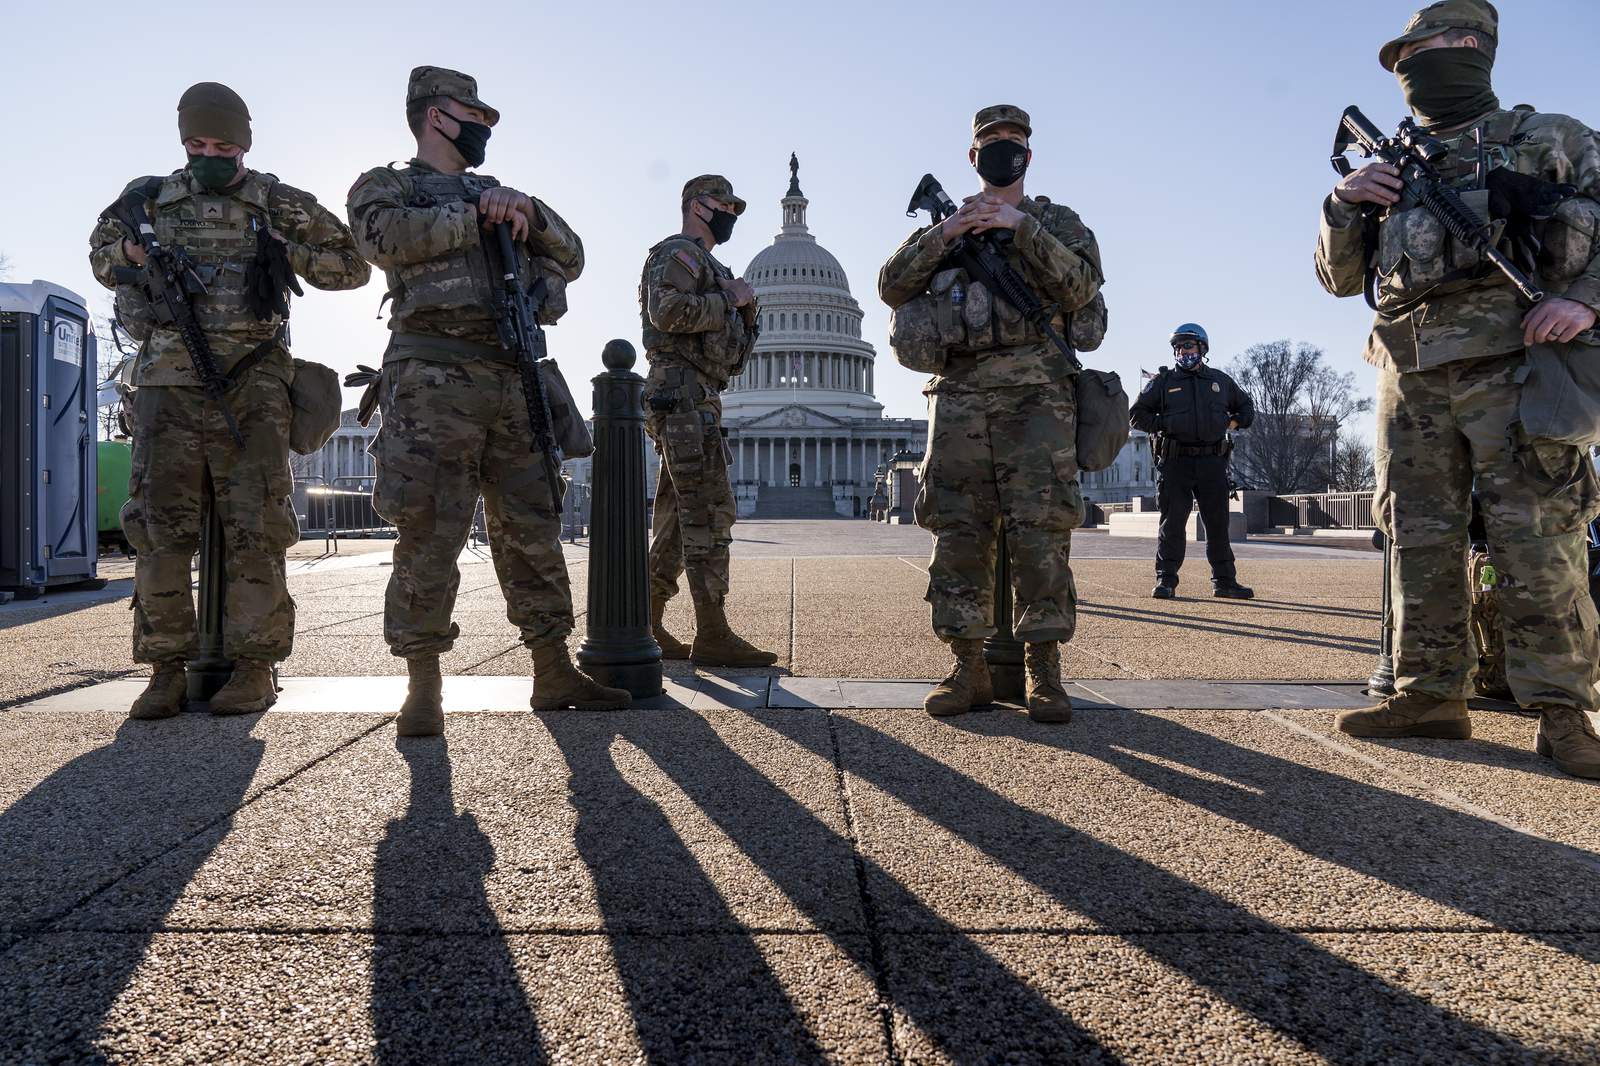 Police uncover ‘possible plot’ by militia to breach Capitol